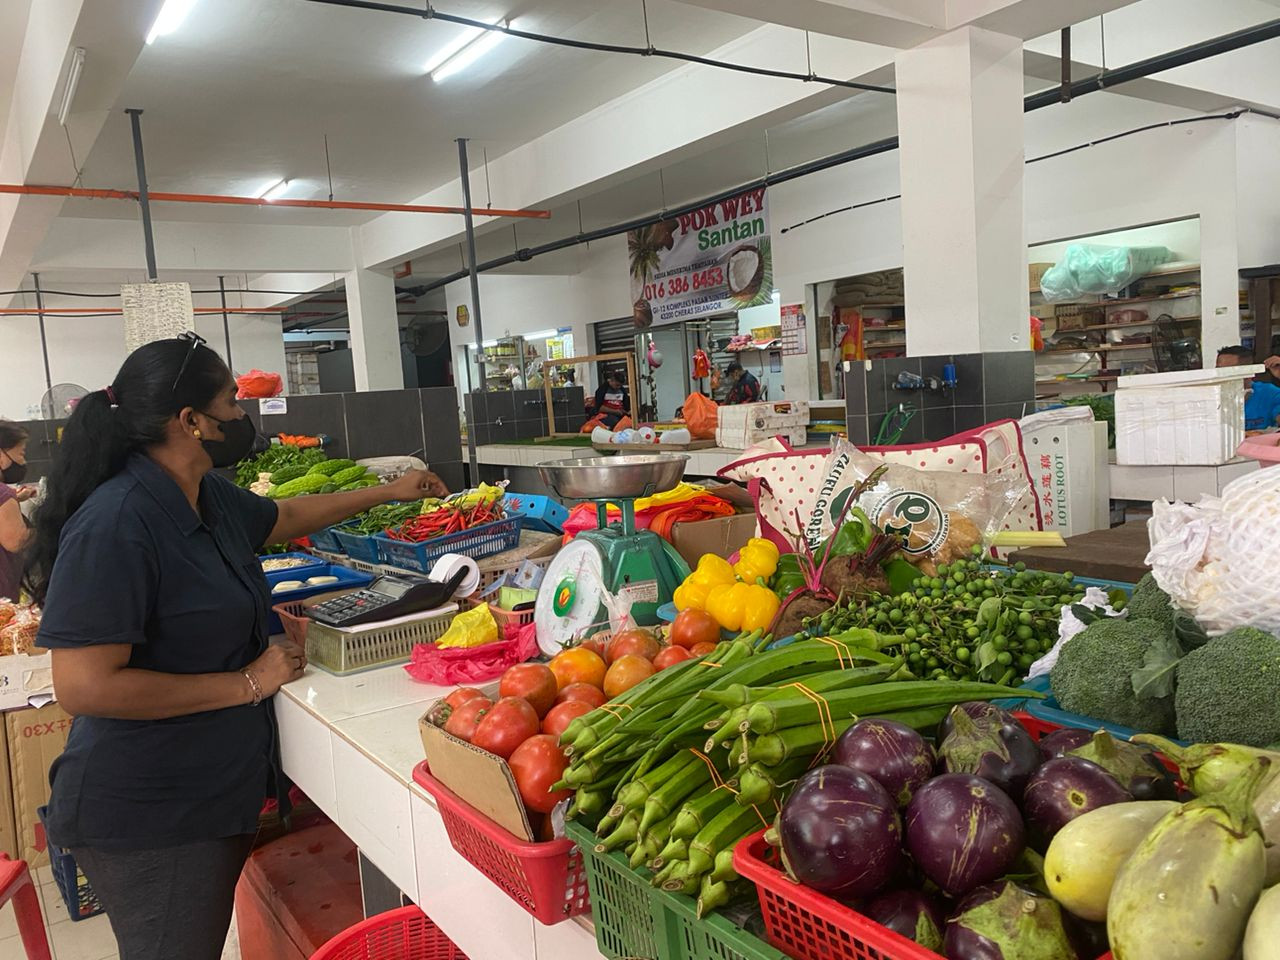 A seller at the Suntex wet market in Cheras, Nyanasoundari, said this is the first time she has seen prices of vegetables rising to such high levels in the 29 years that she has been involved in the business. – SUBASHINI SIVASANKAR/The Vibes pic, February 4, 2023